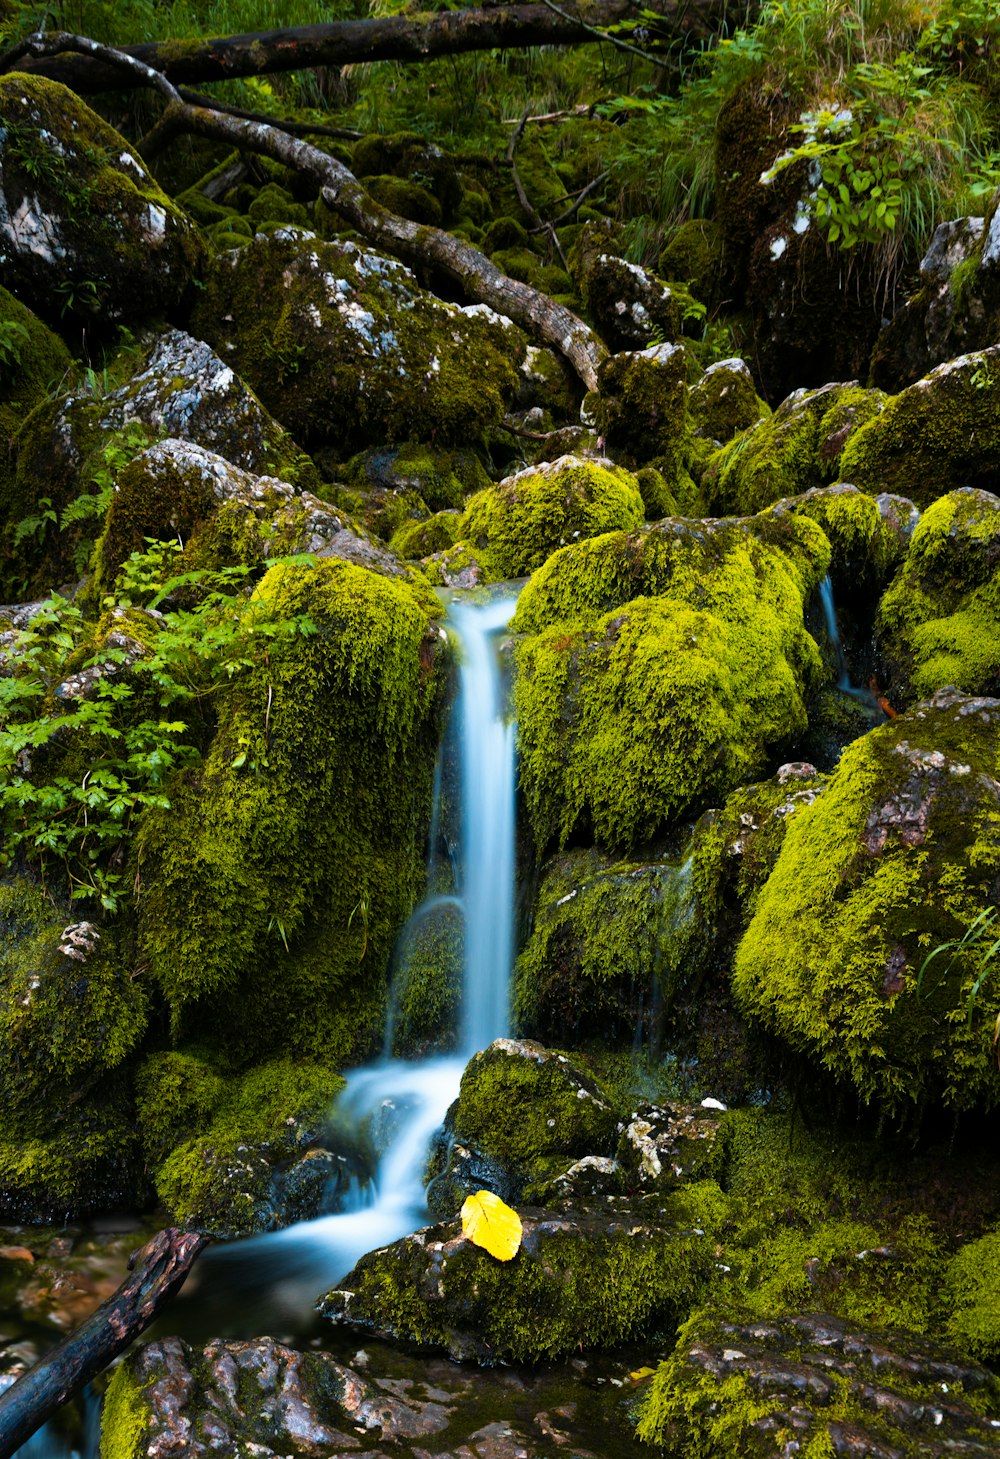 a small waterfall surrounded by green mossy rocks